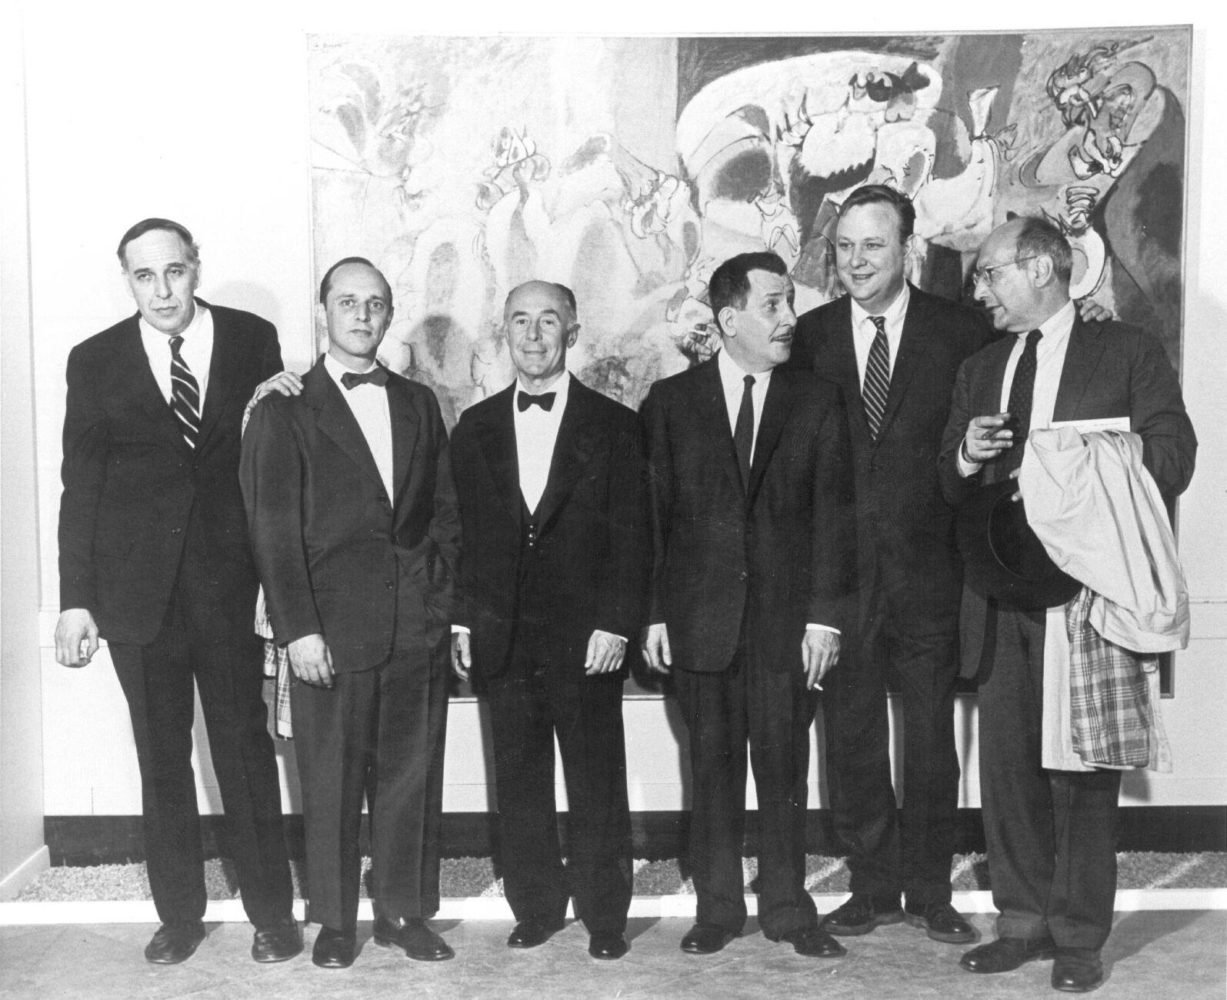 Philip Guston, Jimmy Ernst, Seymour H. Knox, Jr., Franz Kline, Robert Motherwell, and Mark Rothko May 15, 1957 at Albright Knox Gallery in Buffalo